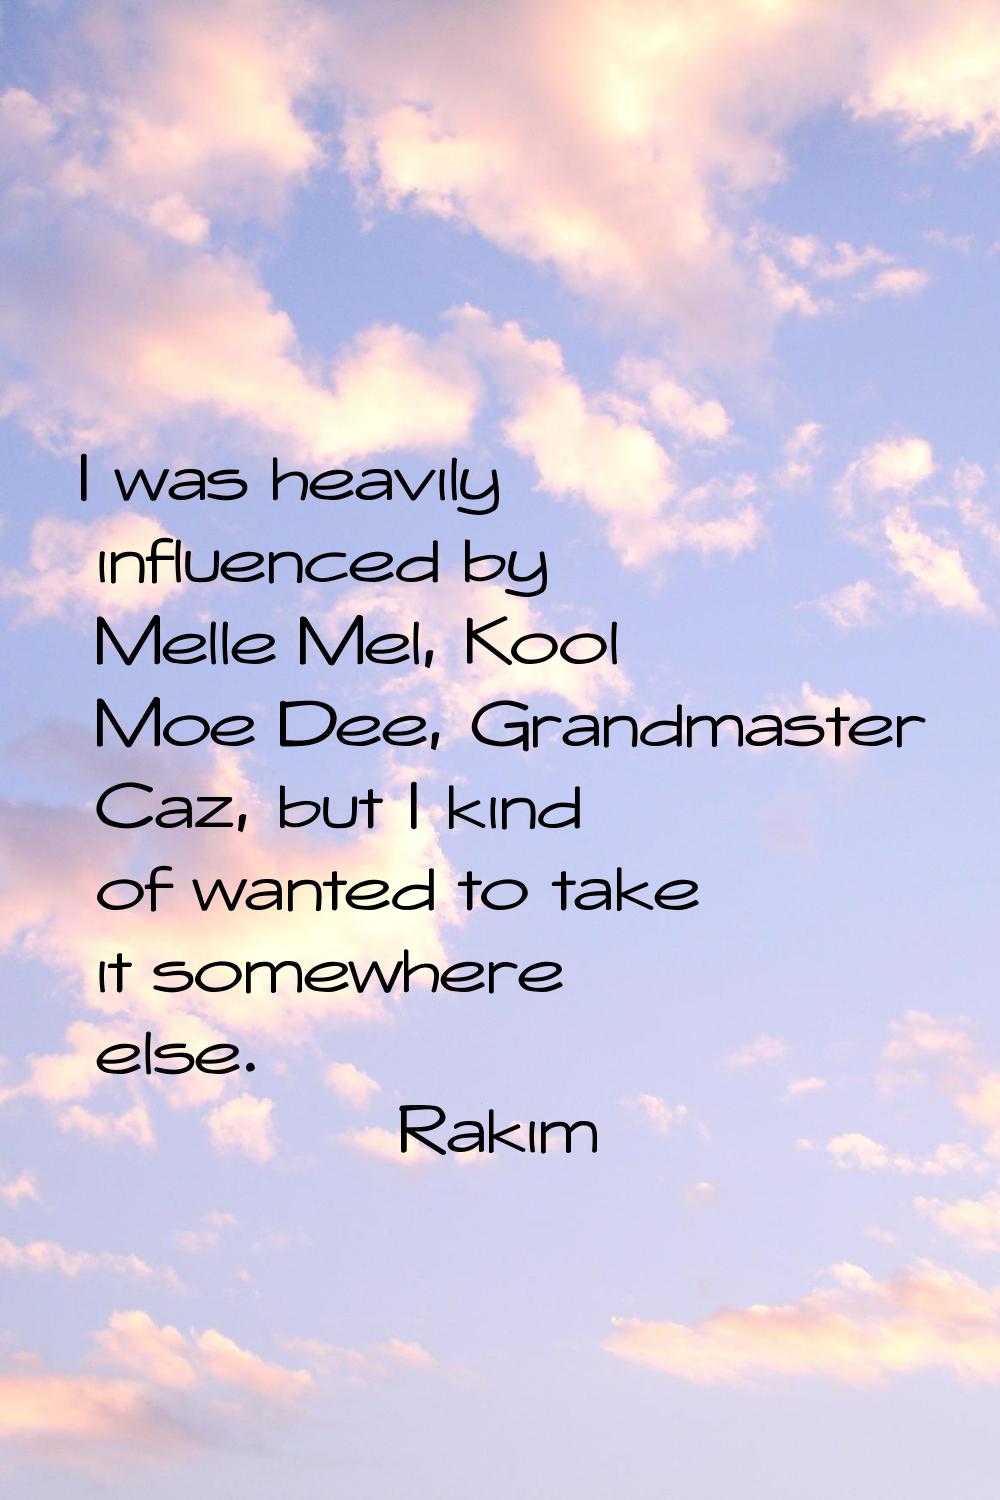 I was heavily influenced by Melle Mel, Kool Moe Dee, Grandmaster Caz, but I kind of wanted to take 